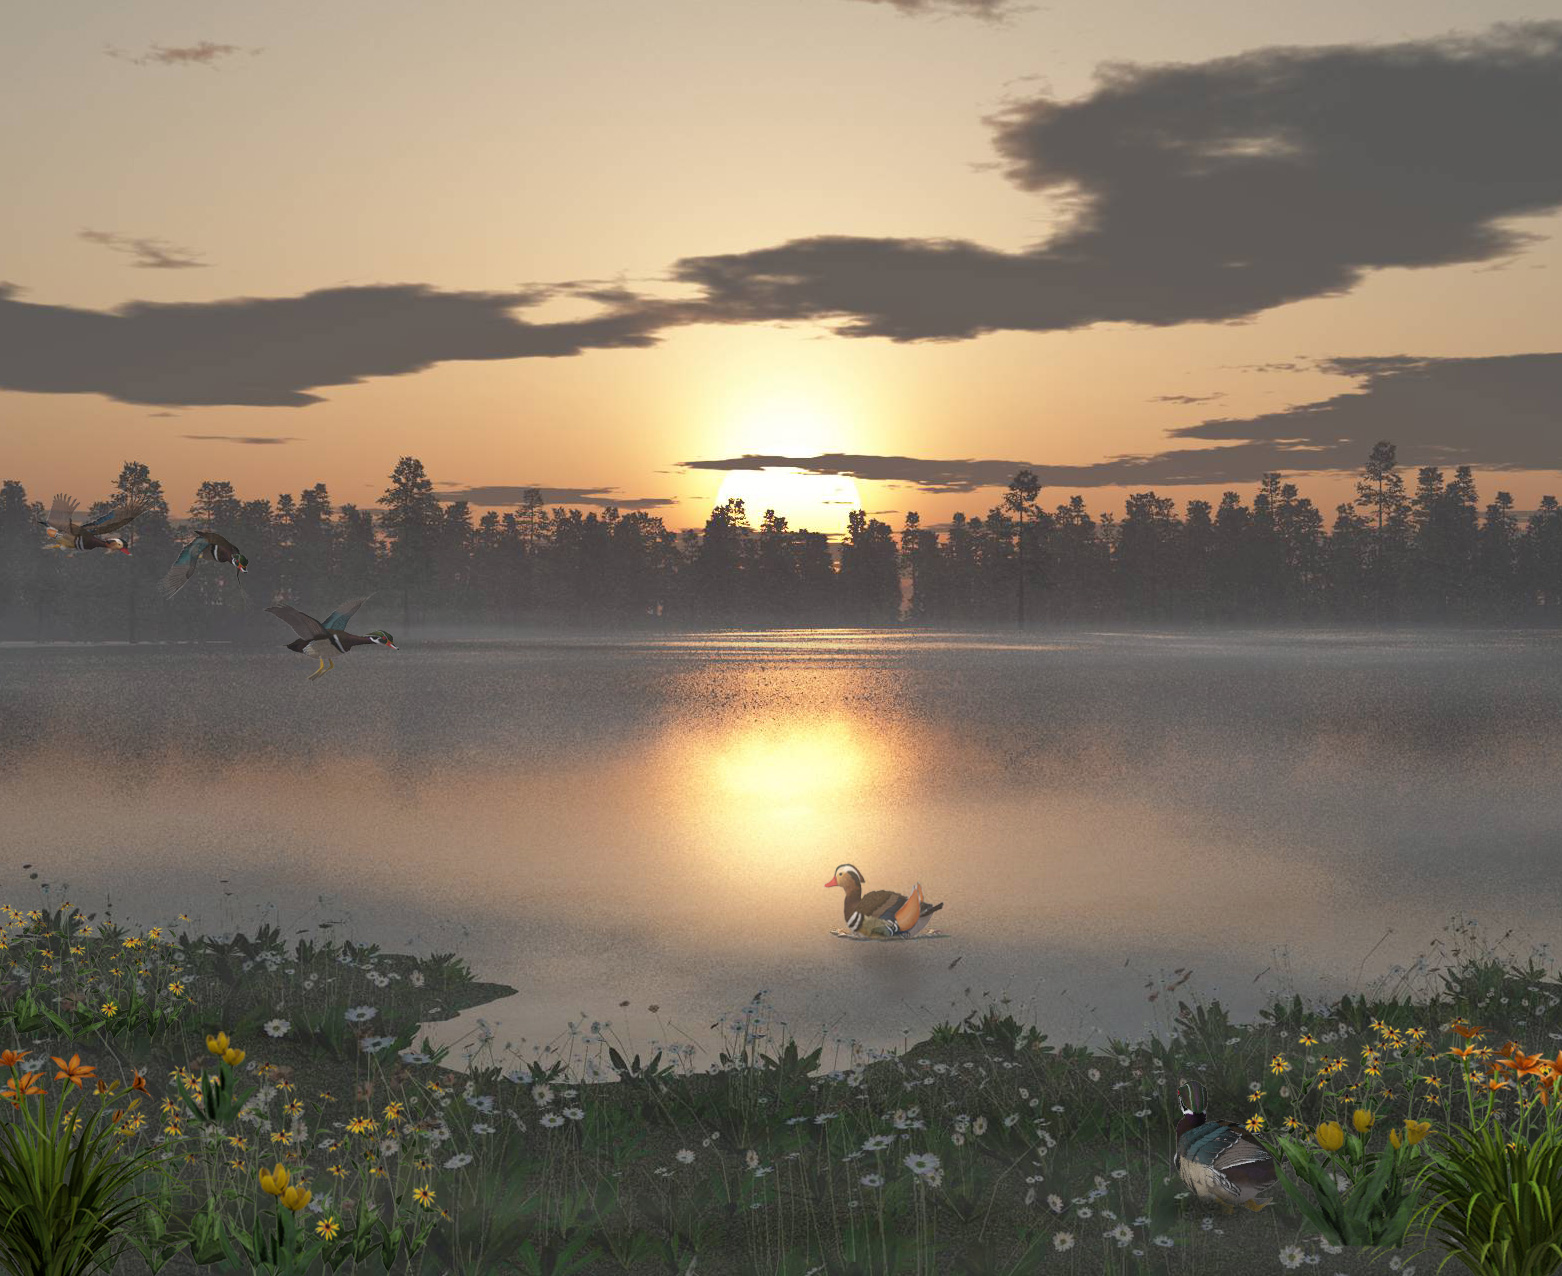 Duck Lake Sunset by cinadisilver